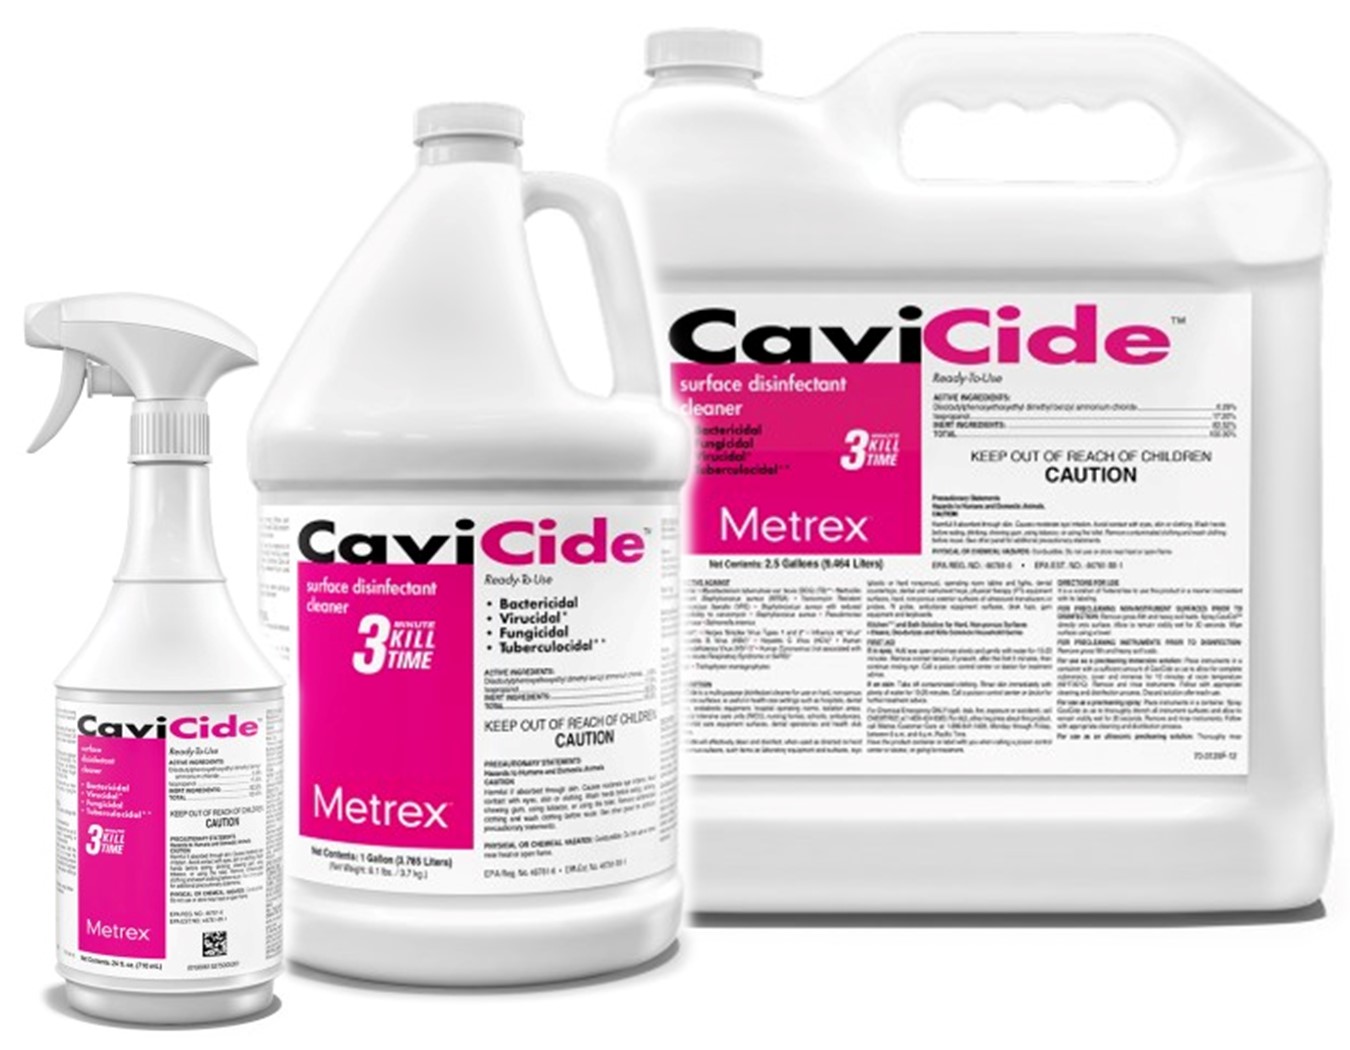 Cavicide Surface Disinfectants by Metrex